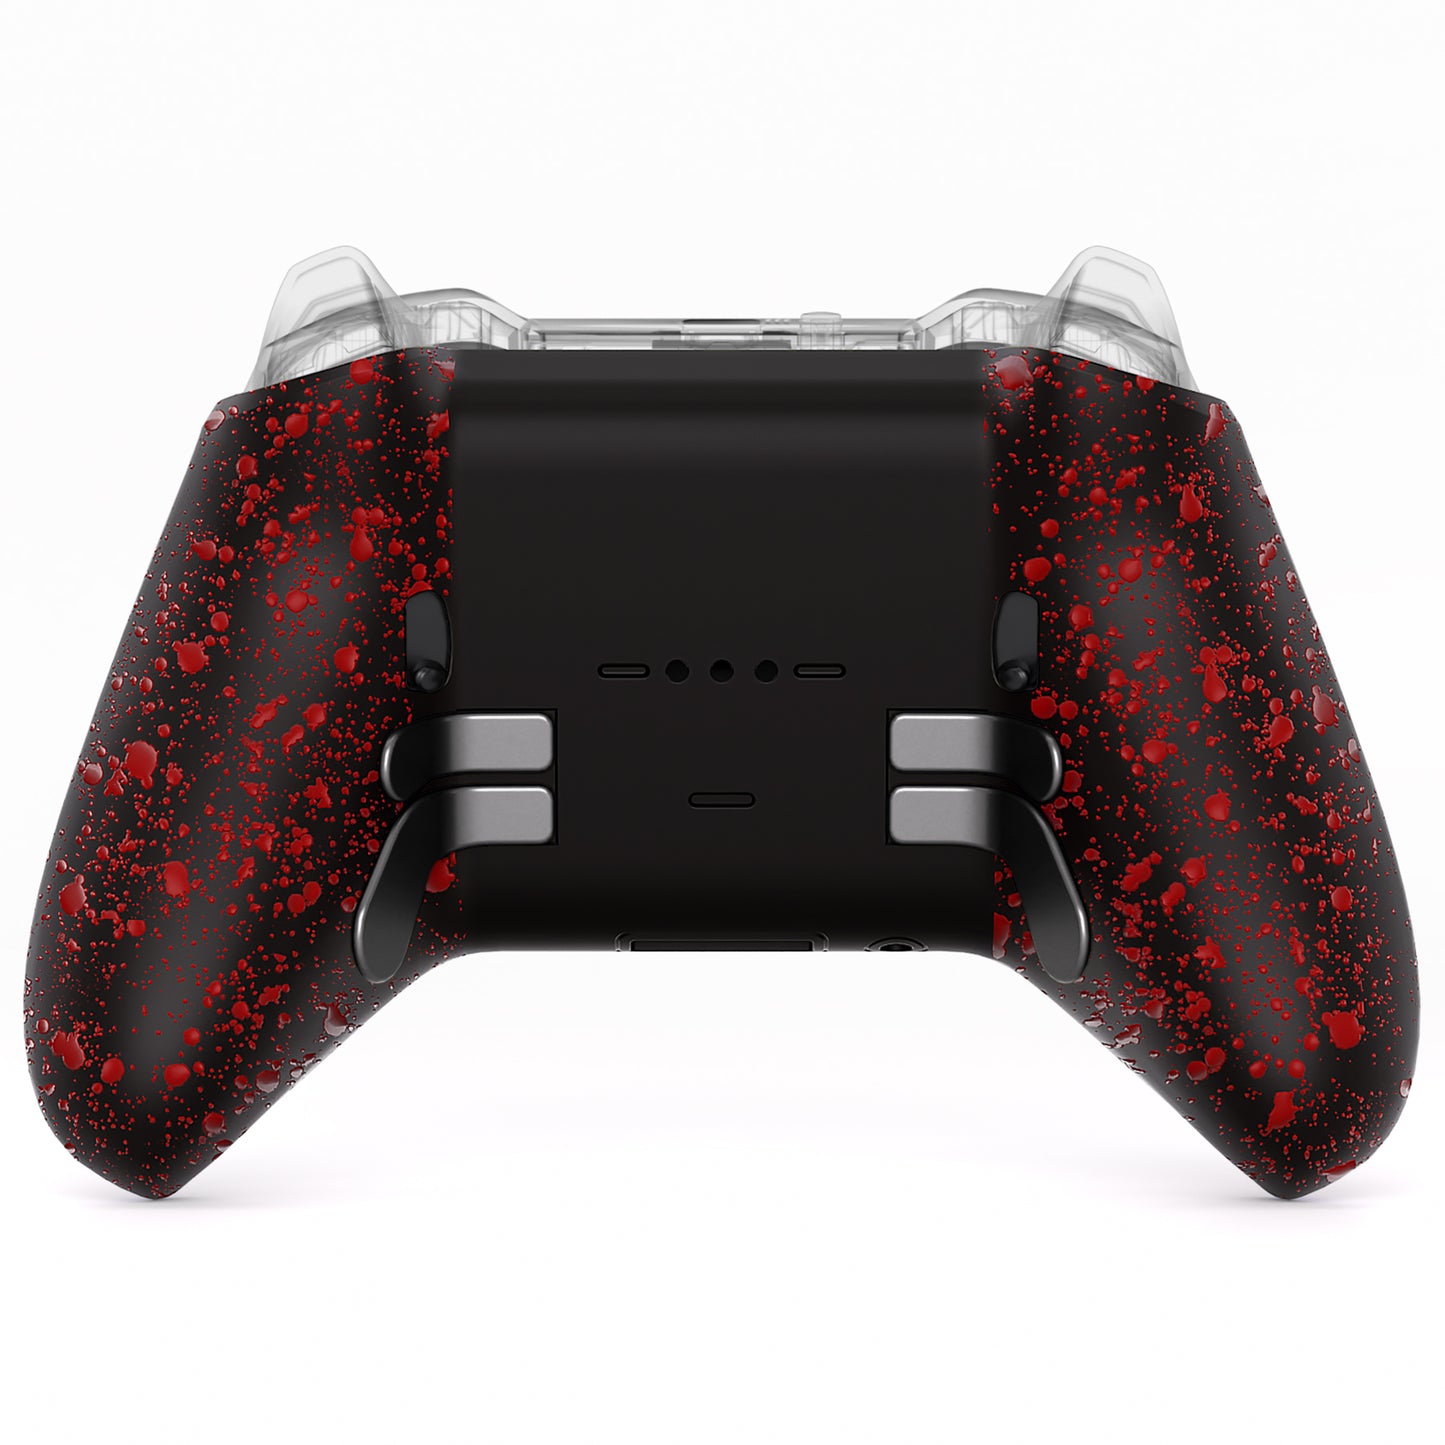 Replacement Bottom Shell Case for Xbox Elite Series 2 & Elite Series 2 Core Controller Model 1797 - Textured Red eXtremeRate